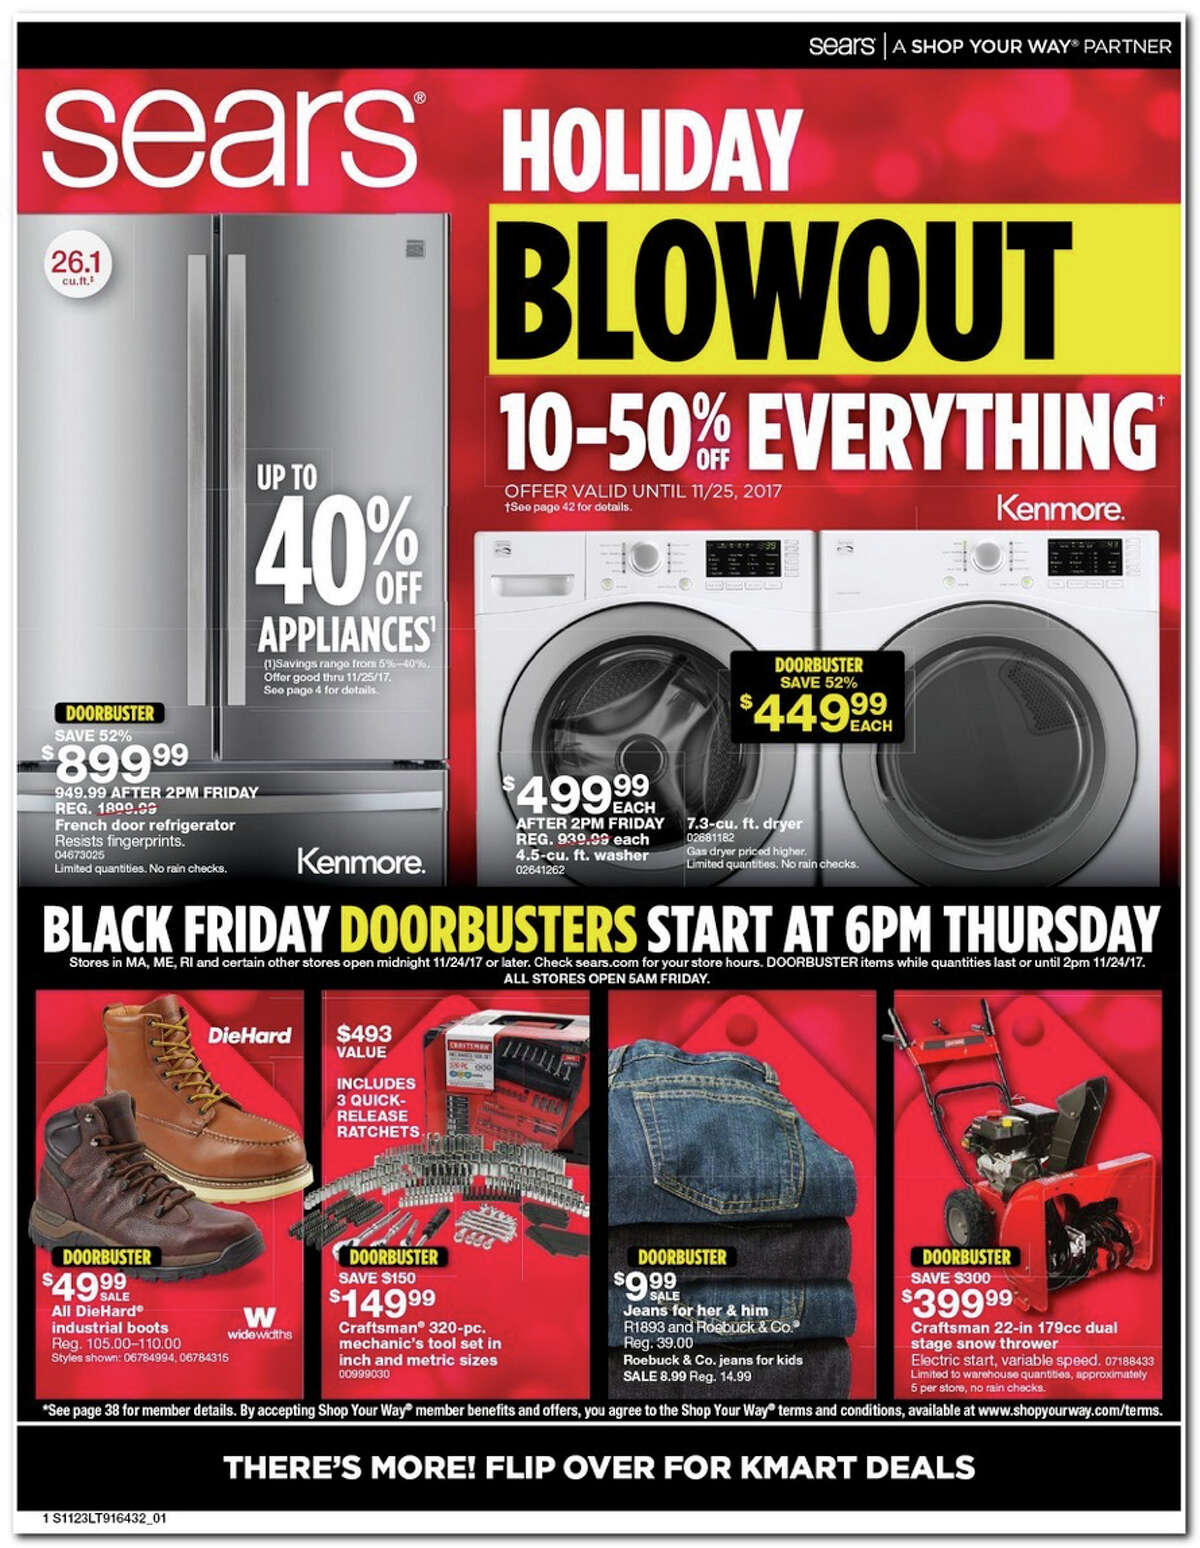 Sears has released its 2017 Black Friday Doorbuster ad. Prices and promotion begin on Thursday, Nov. 23 at 6 p.m. and are subject to change and availability, based on the retailer's determination.